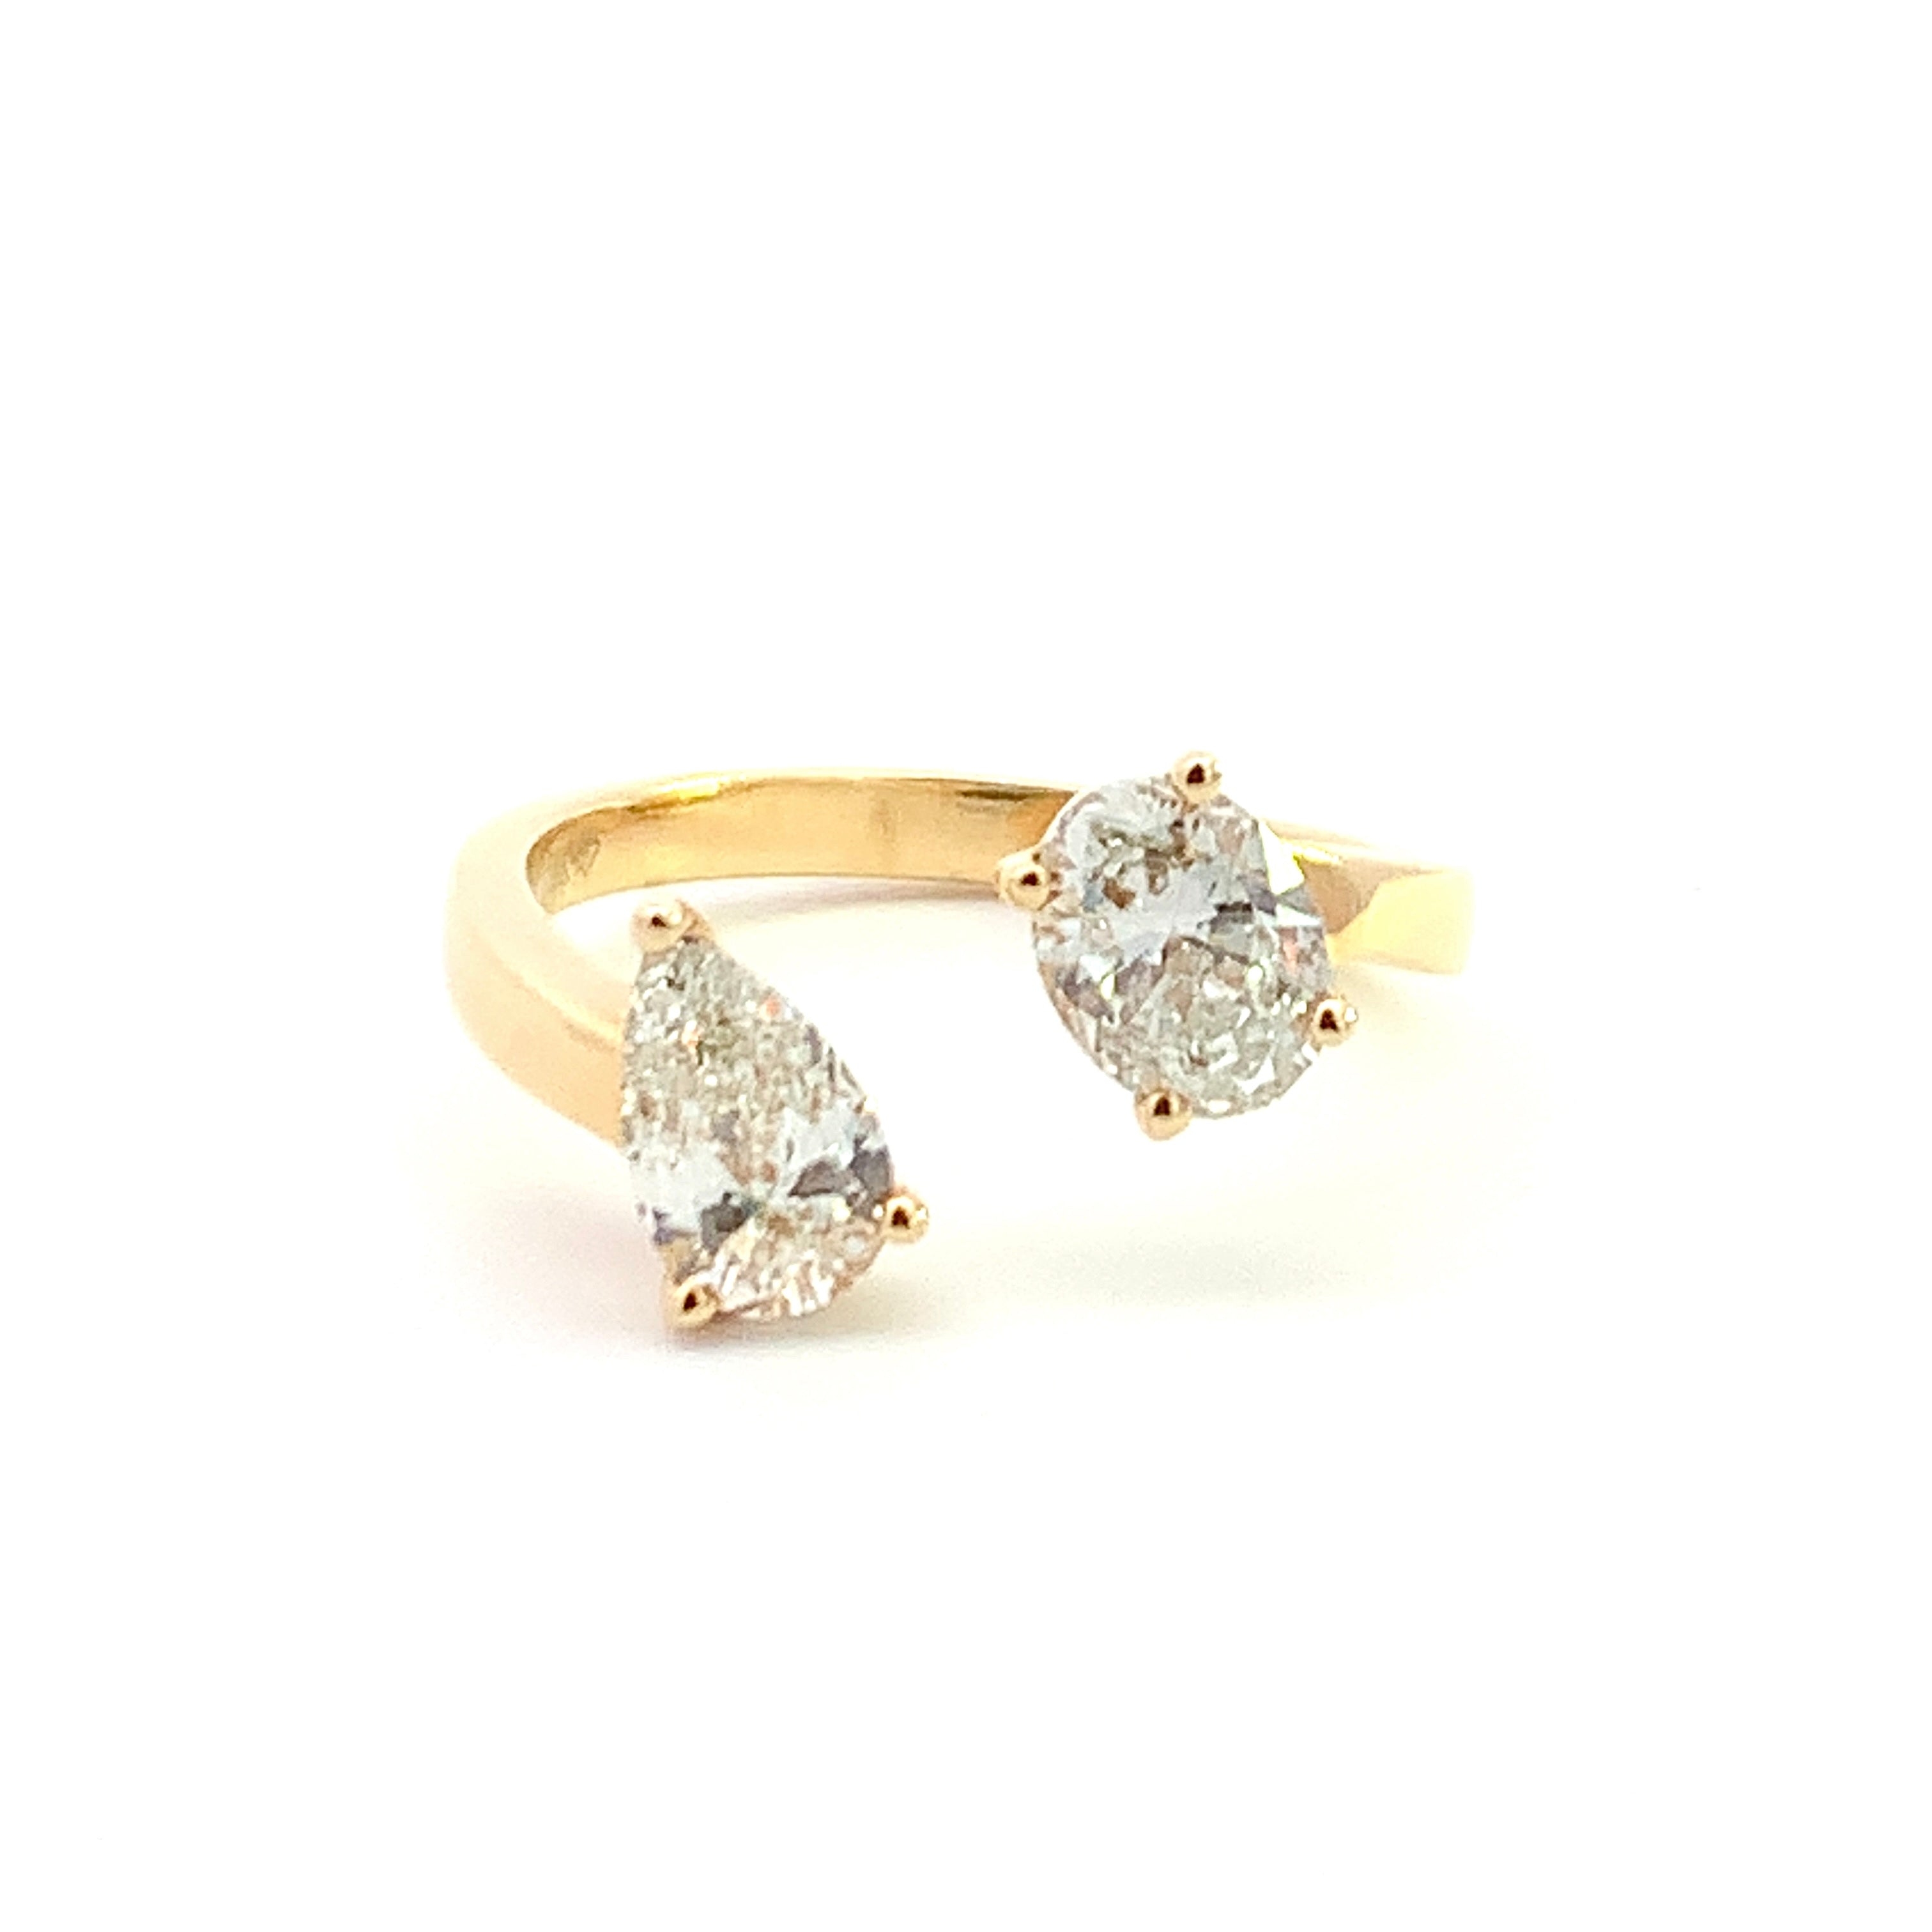 The Yellow Gold Twin Ring- 50% OFF!